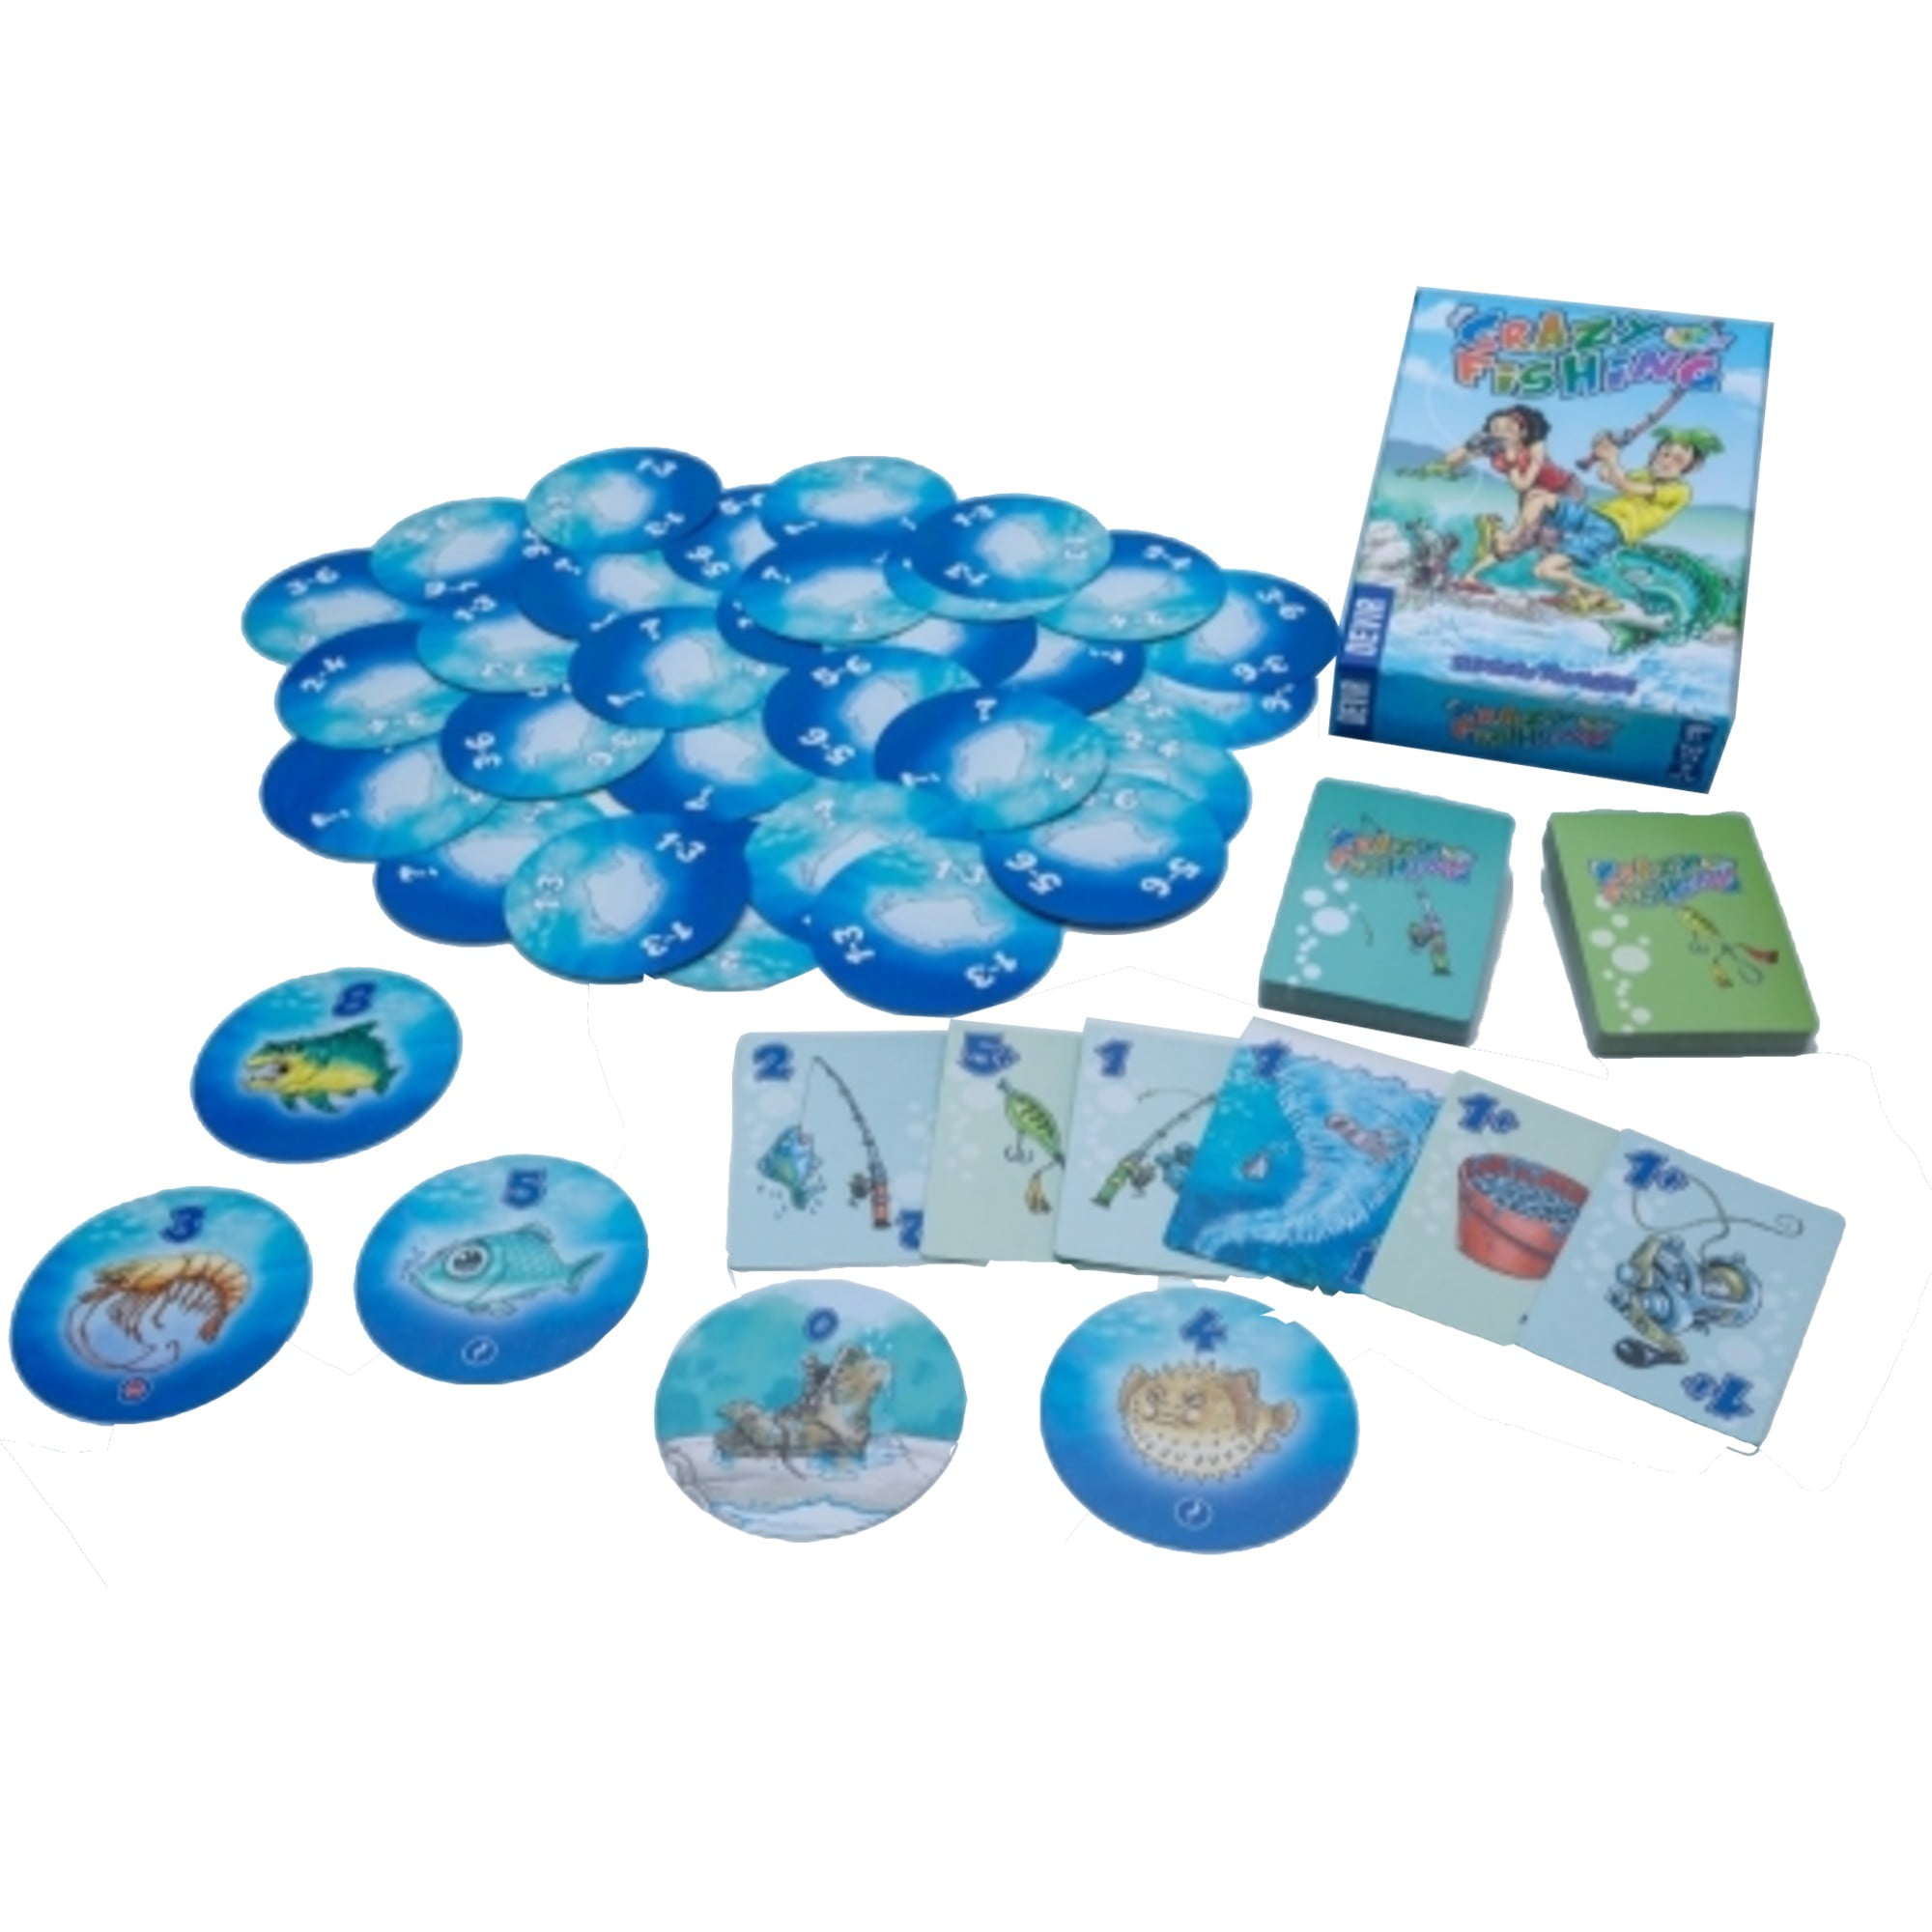 Crazy Fishing board game